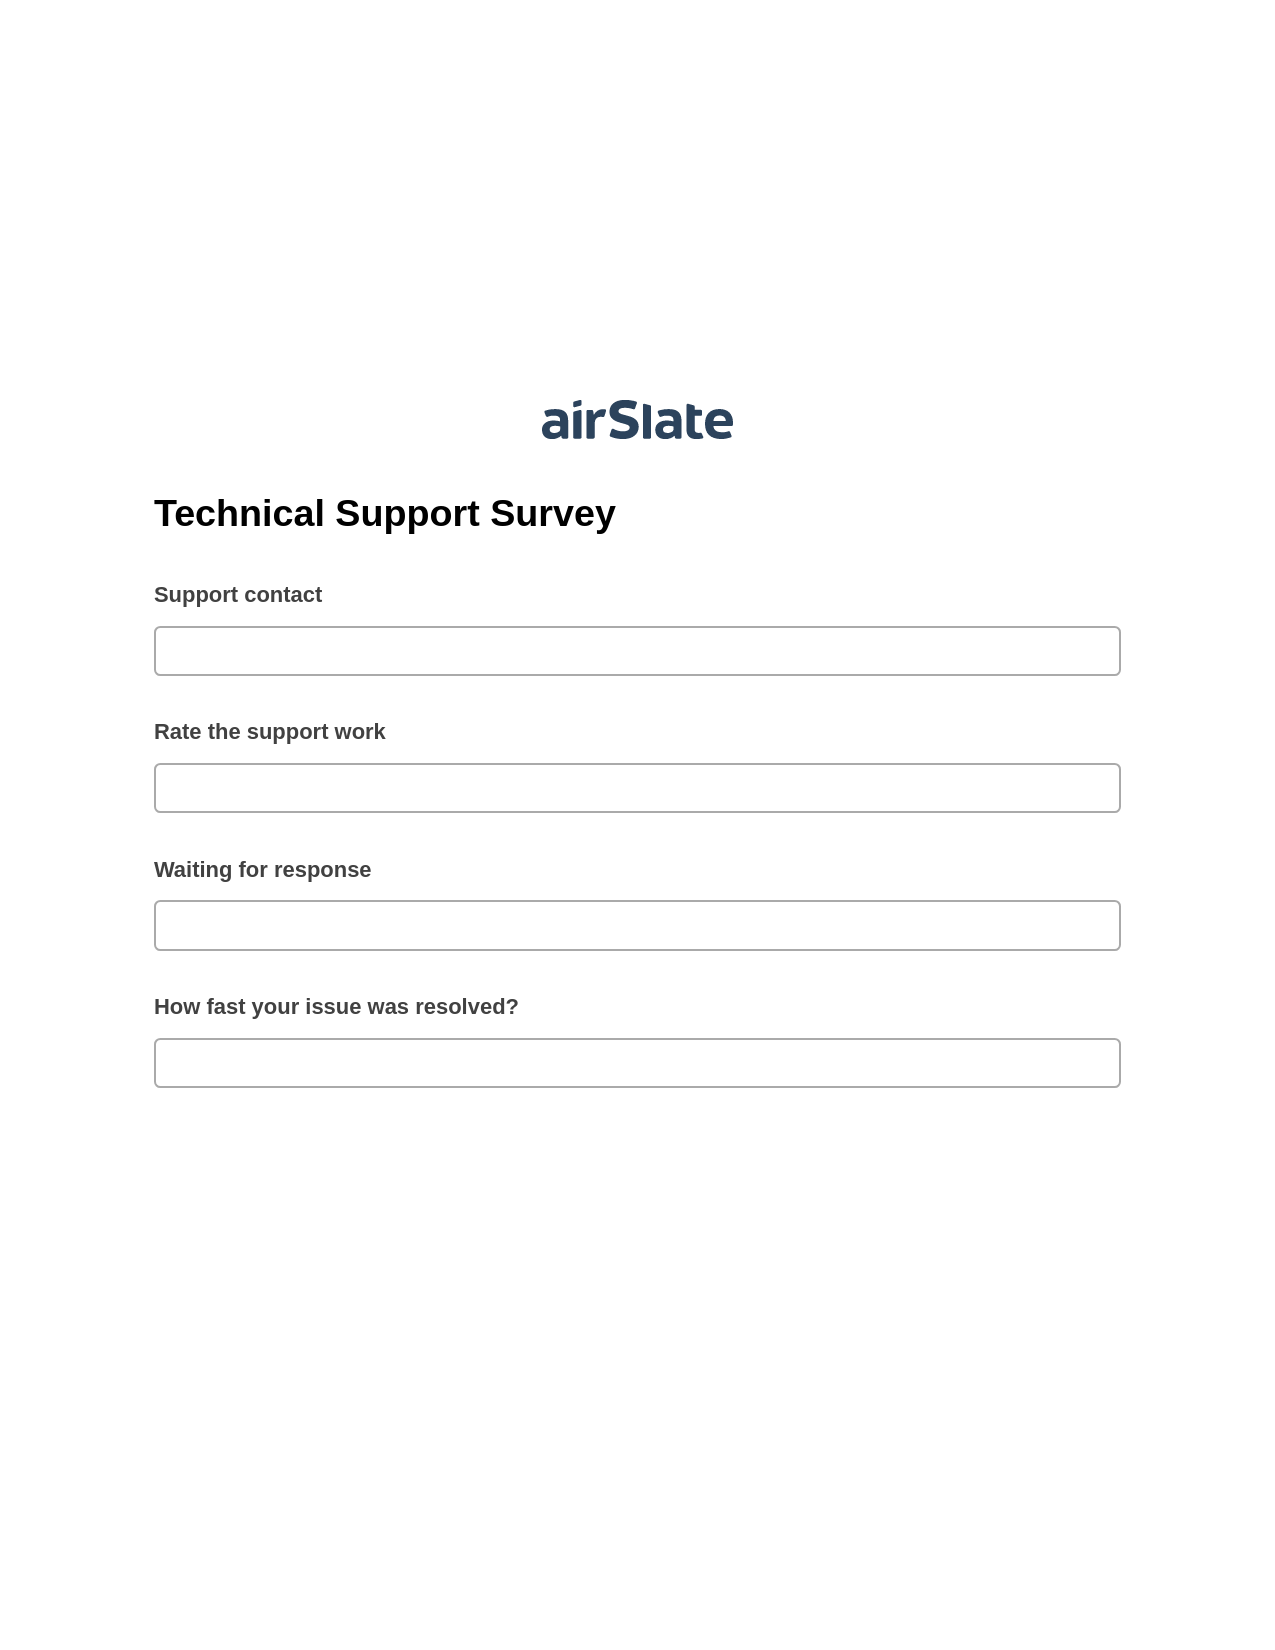 Technical Support Survey Pre-fill from Excel Spreadsheet Bot, Create slate from another Flow Bot, Export to NetSuite Bot